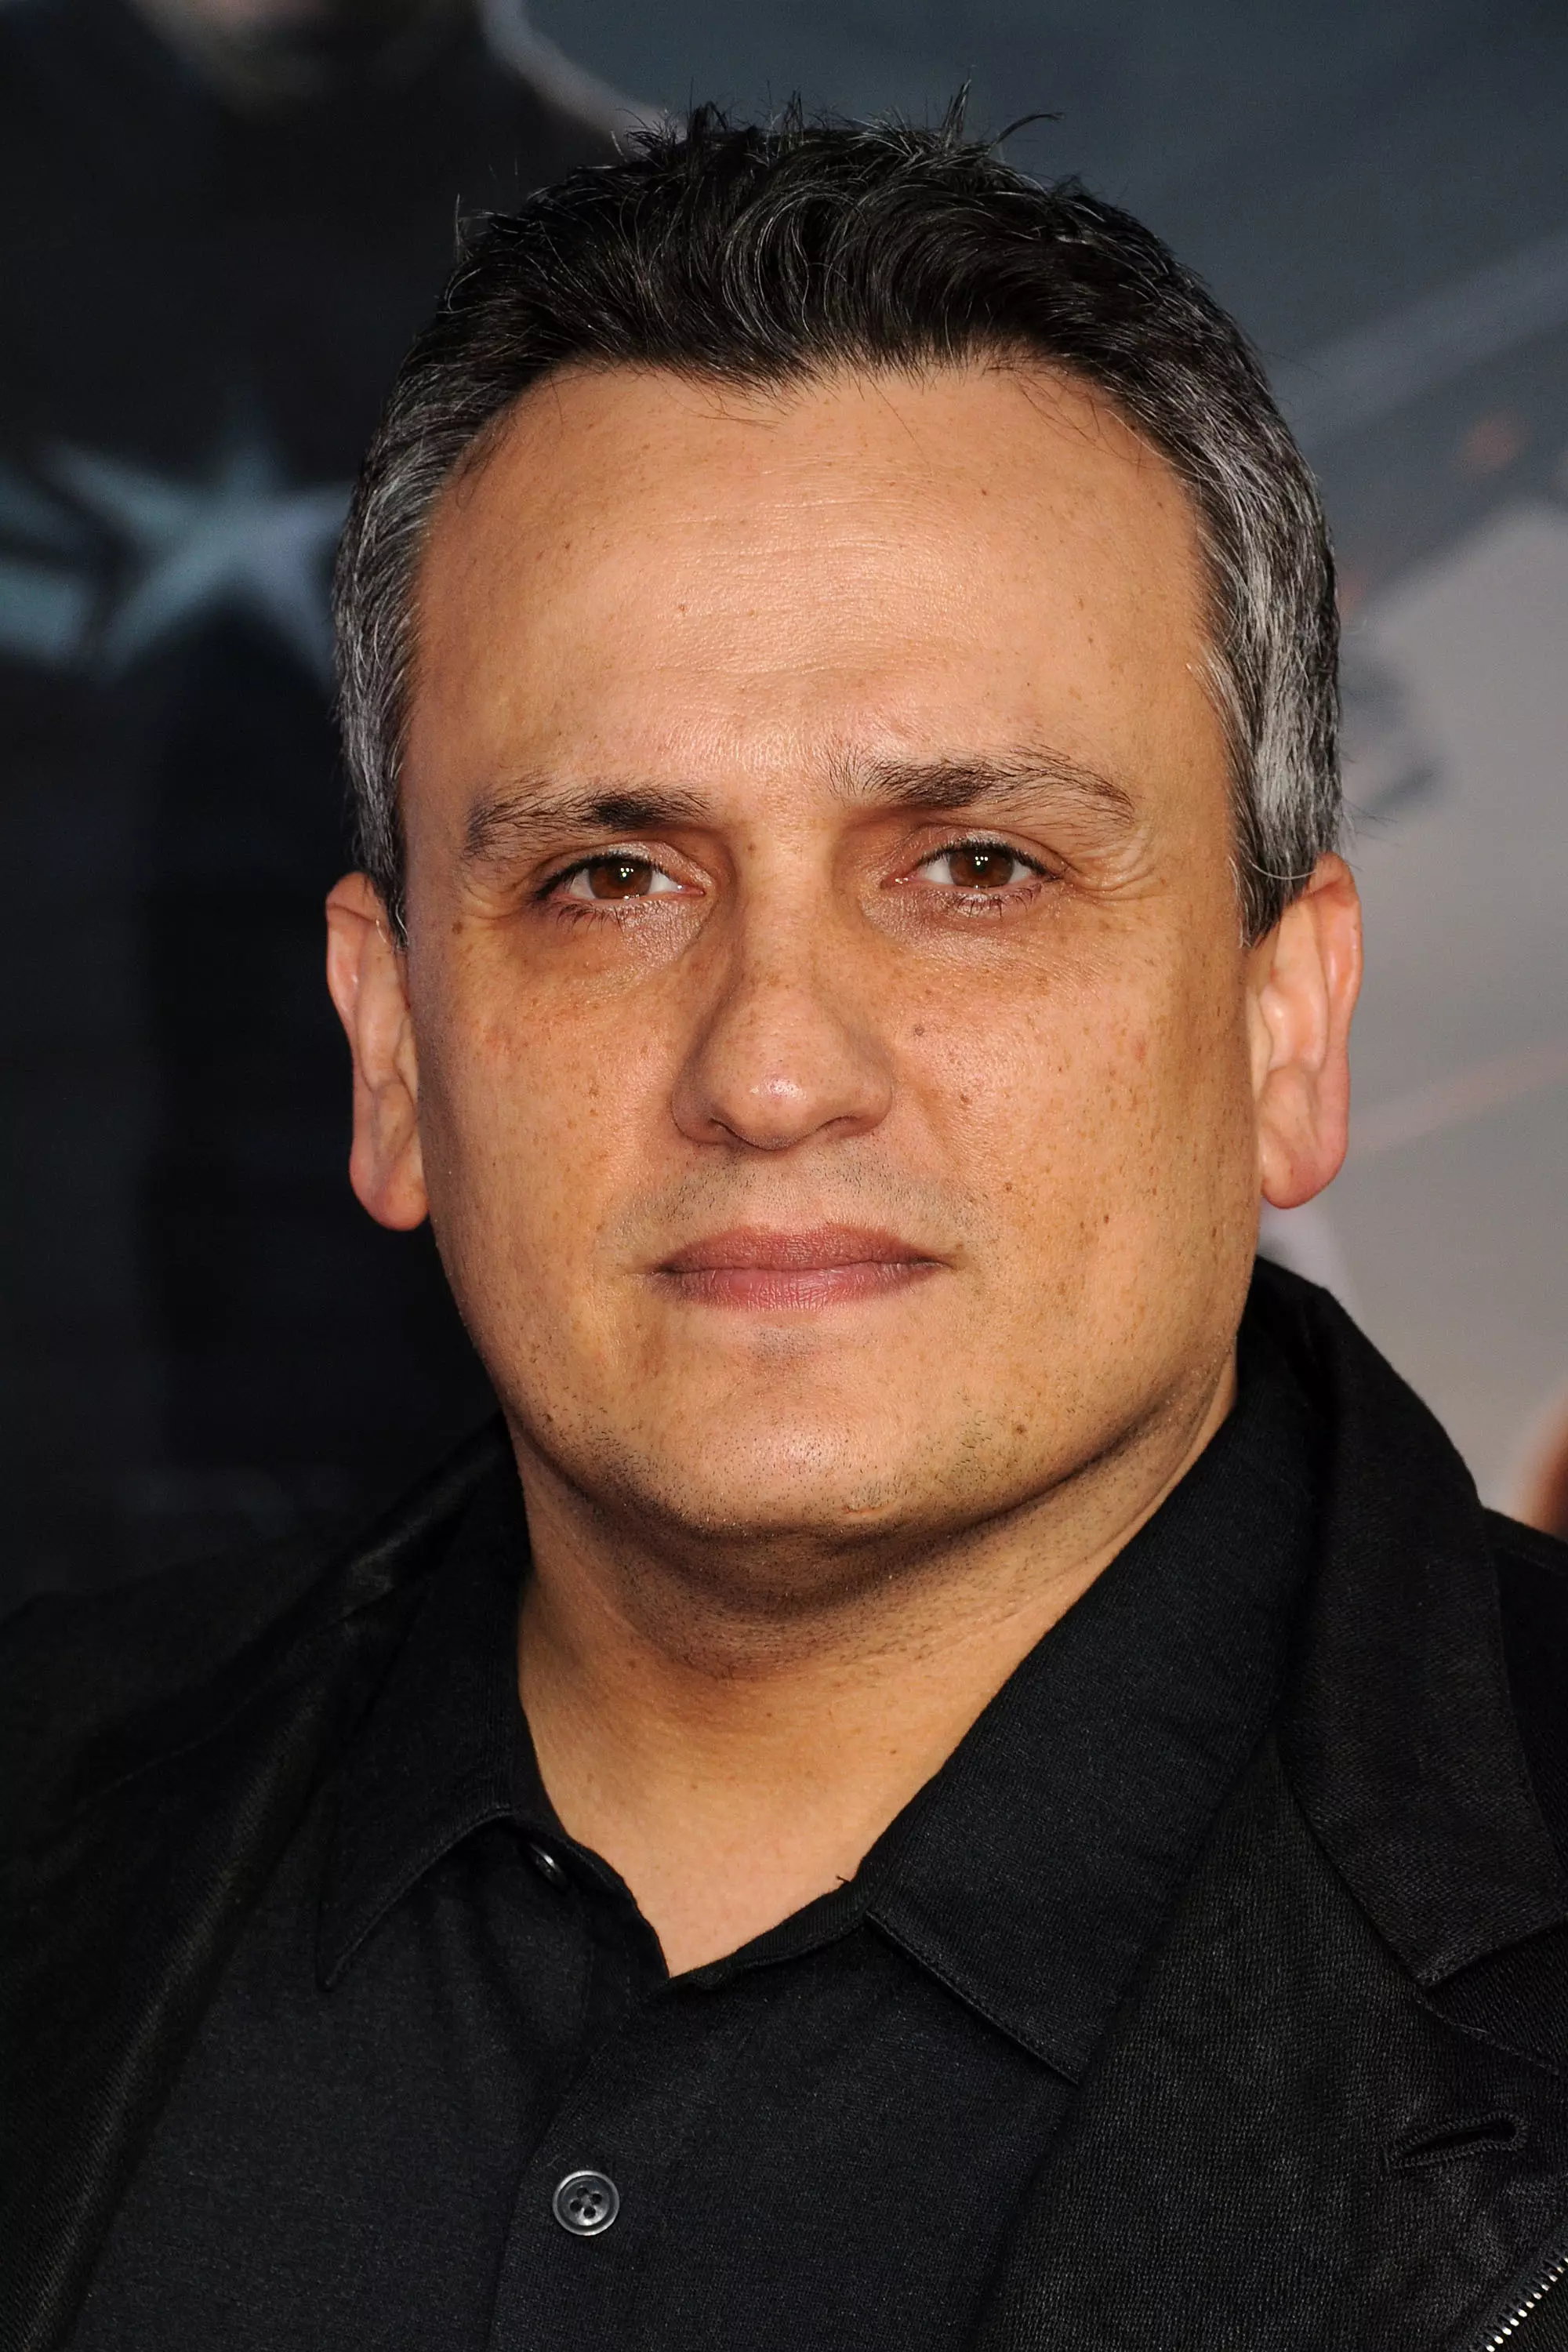 Joe Russo has signed up for an Extraction sequel.